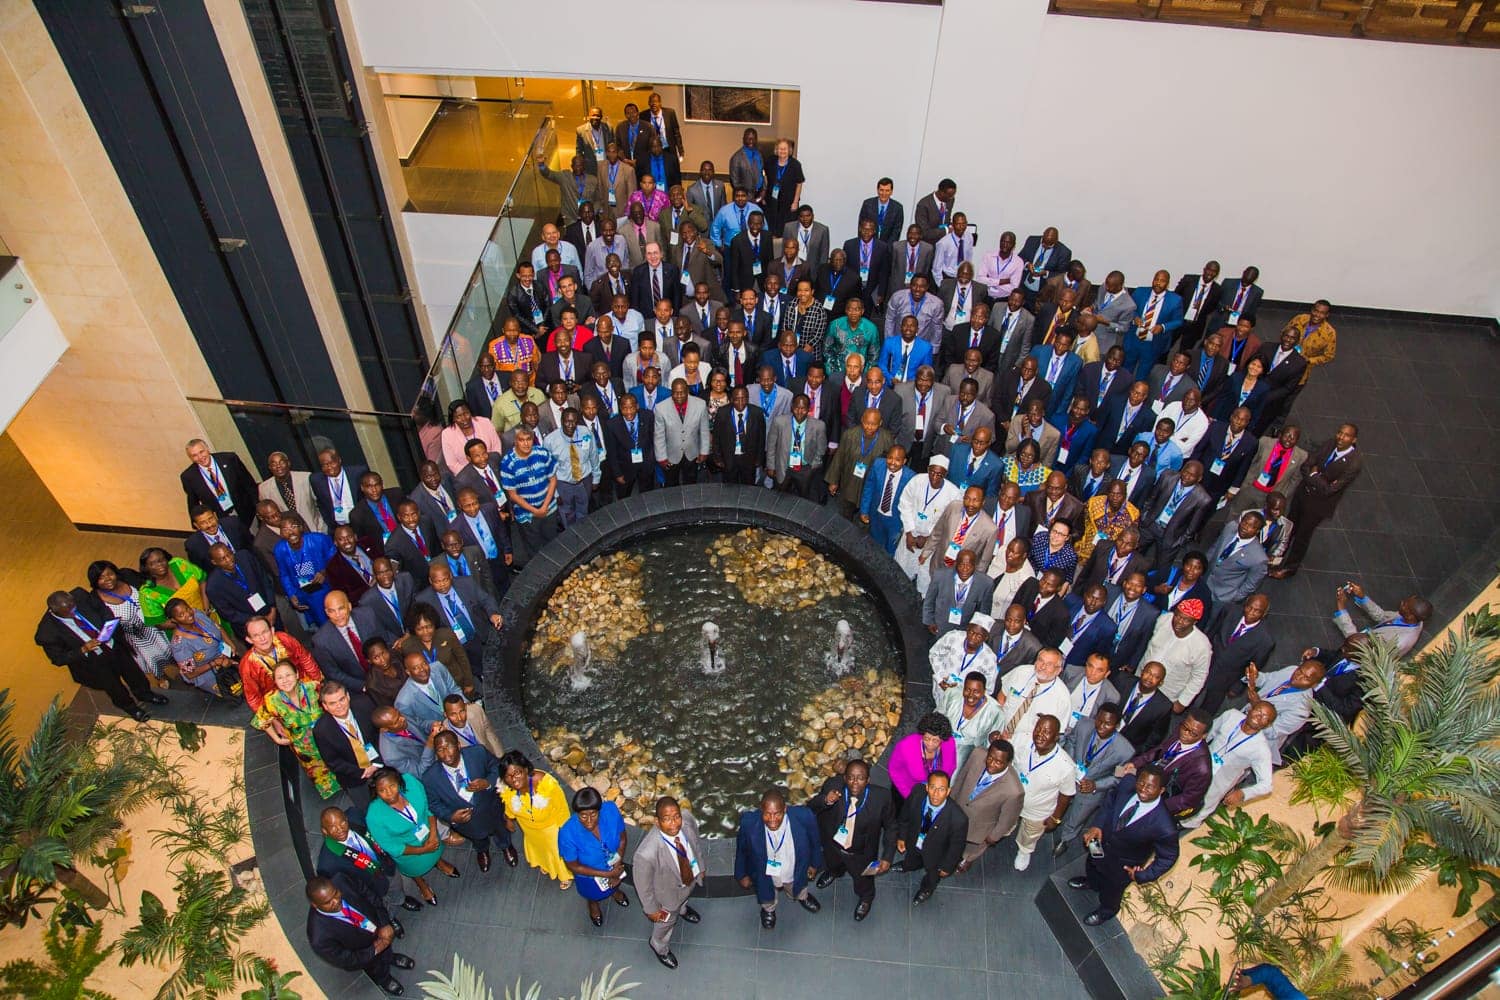 A group photo of the church leaders and educators attending the Pan-African LEAD Conference in Kigali, Rwanda, on February 15-19, 2017. The event discussed current trends and made suggestions to enhance Adventist education.